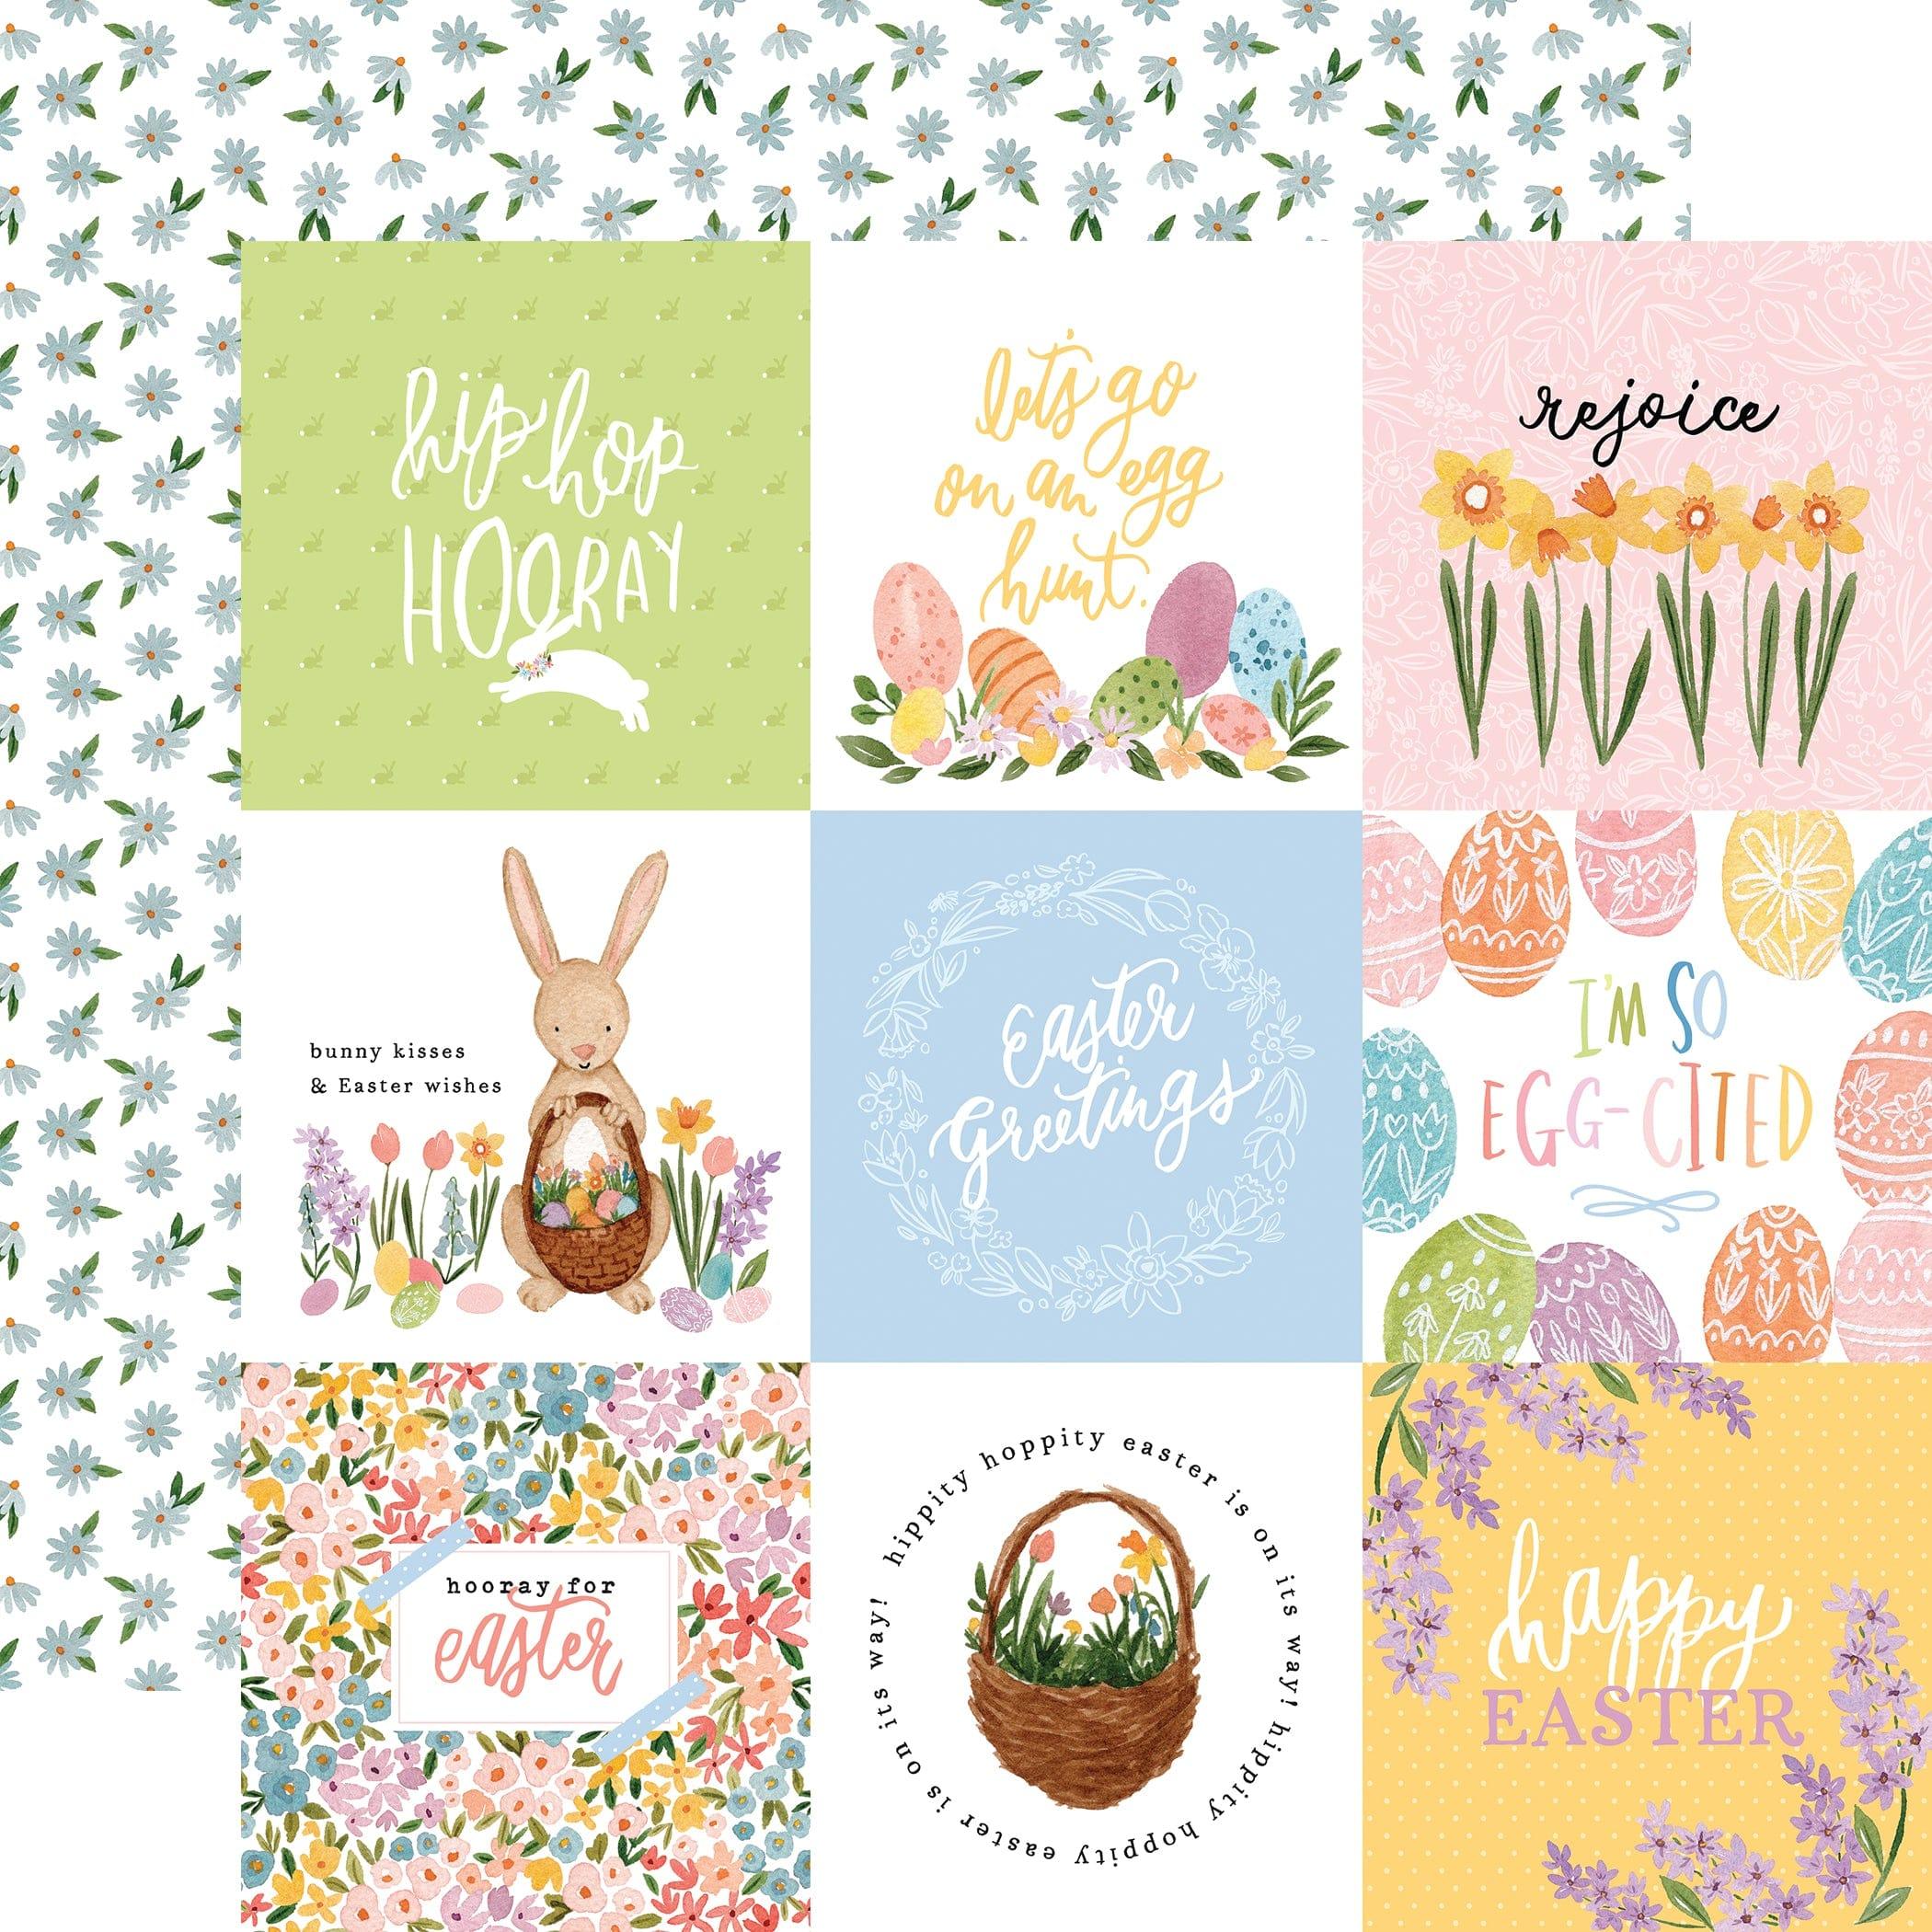 My Favorite Easter Collection 4 x 4 Journaling Cards 12 x 12 Double-Sided Scrapbook Paper by Echo Park Paper - Scrapbook Supply Companies